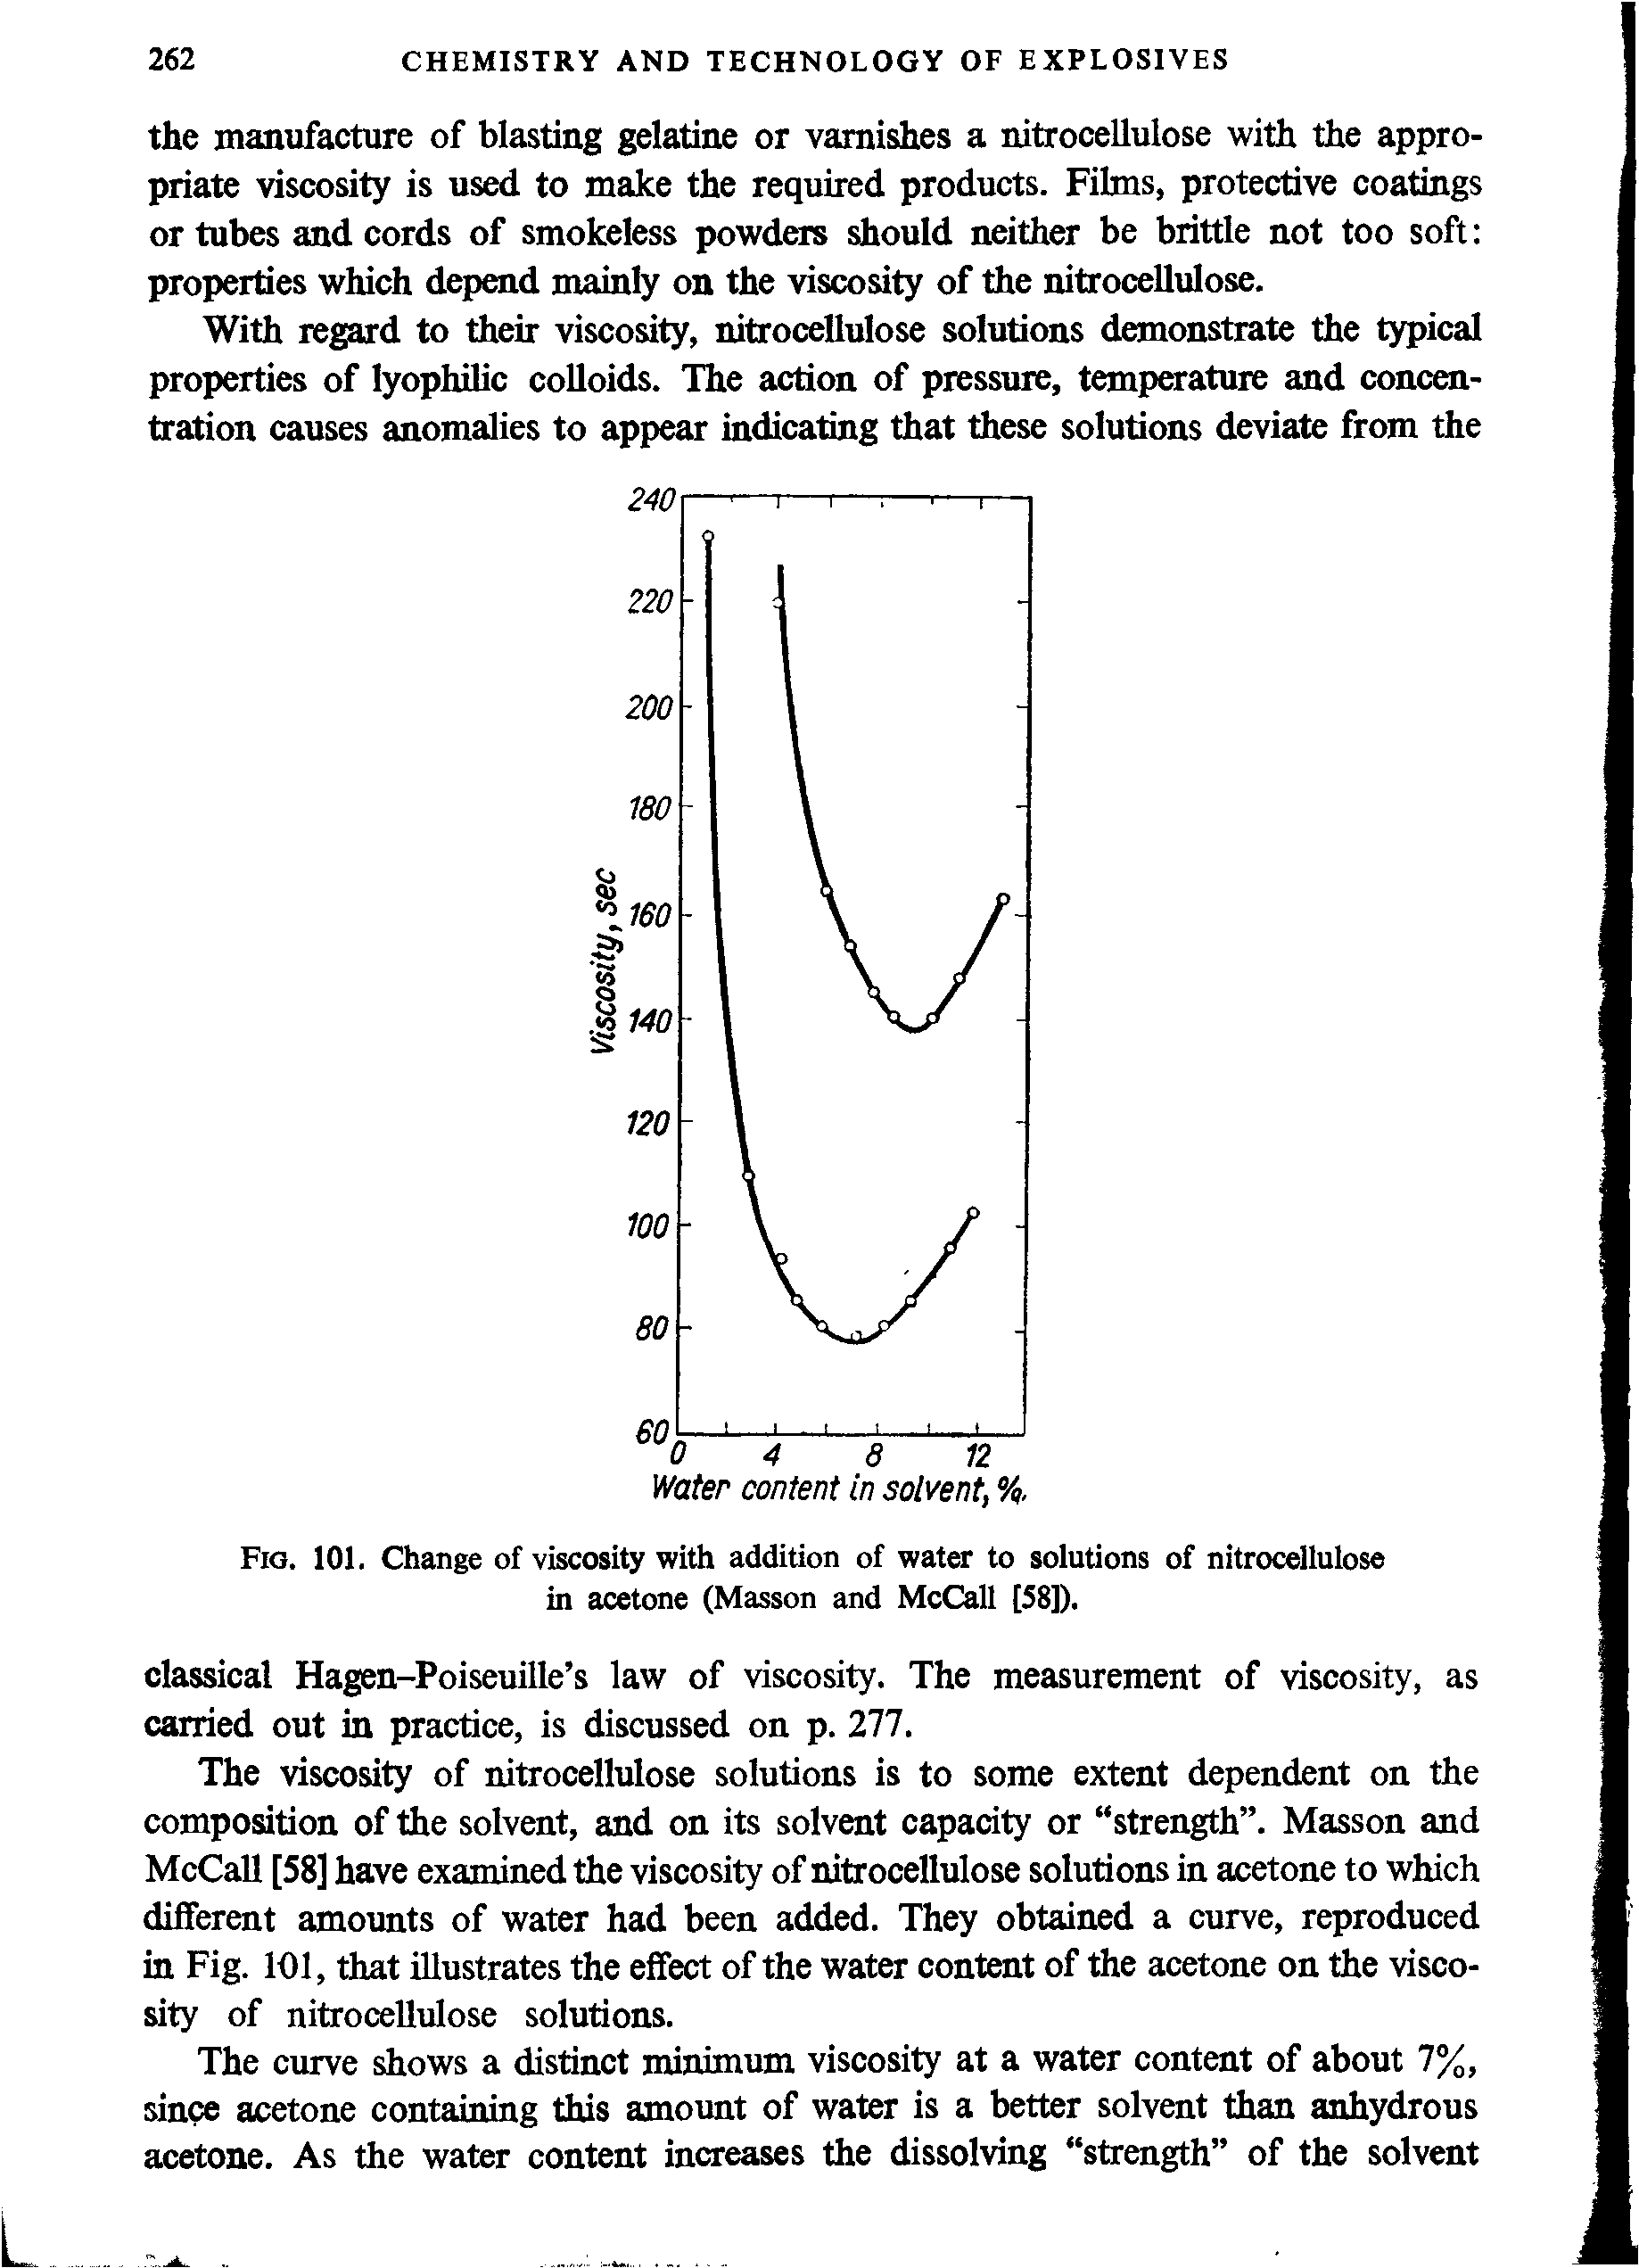 Fig. 101. Change of viscosity with addition of water to solutions of nitrocellulose in acetone (Masson and McCall [58]).